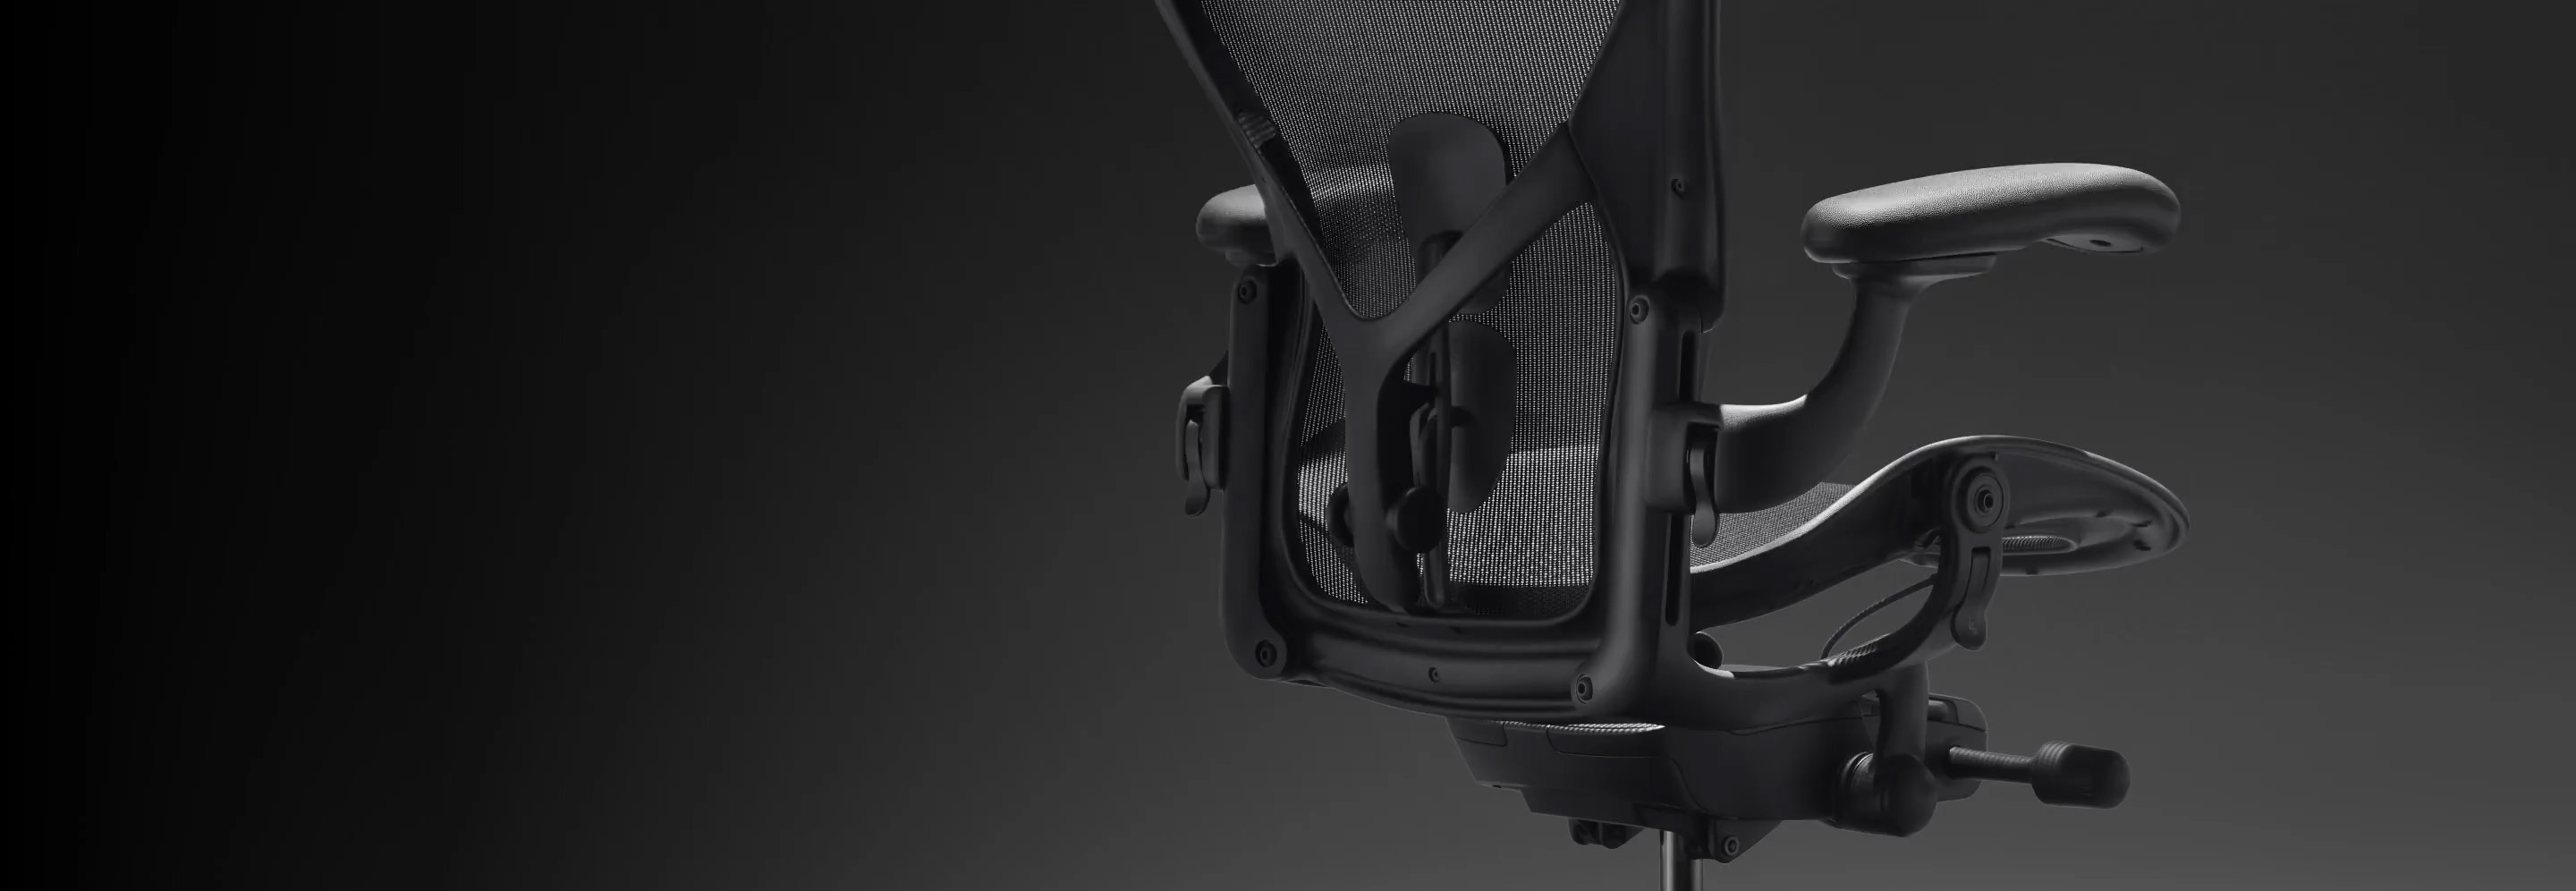 Aeron Chair in Onyx, made with ocean-bound plastic.